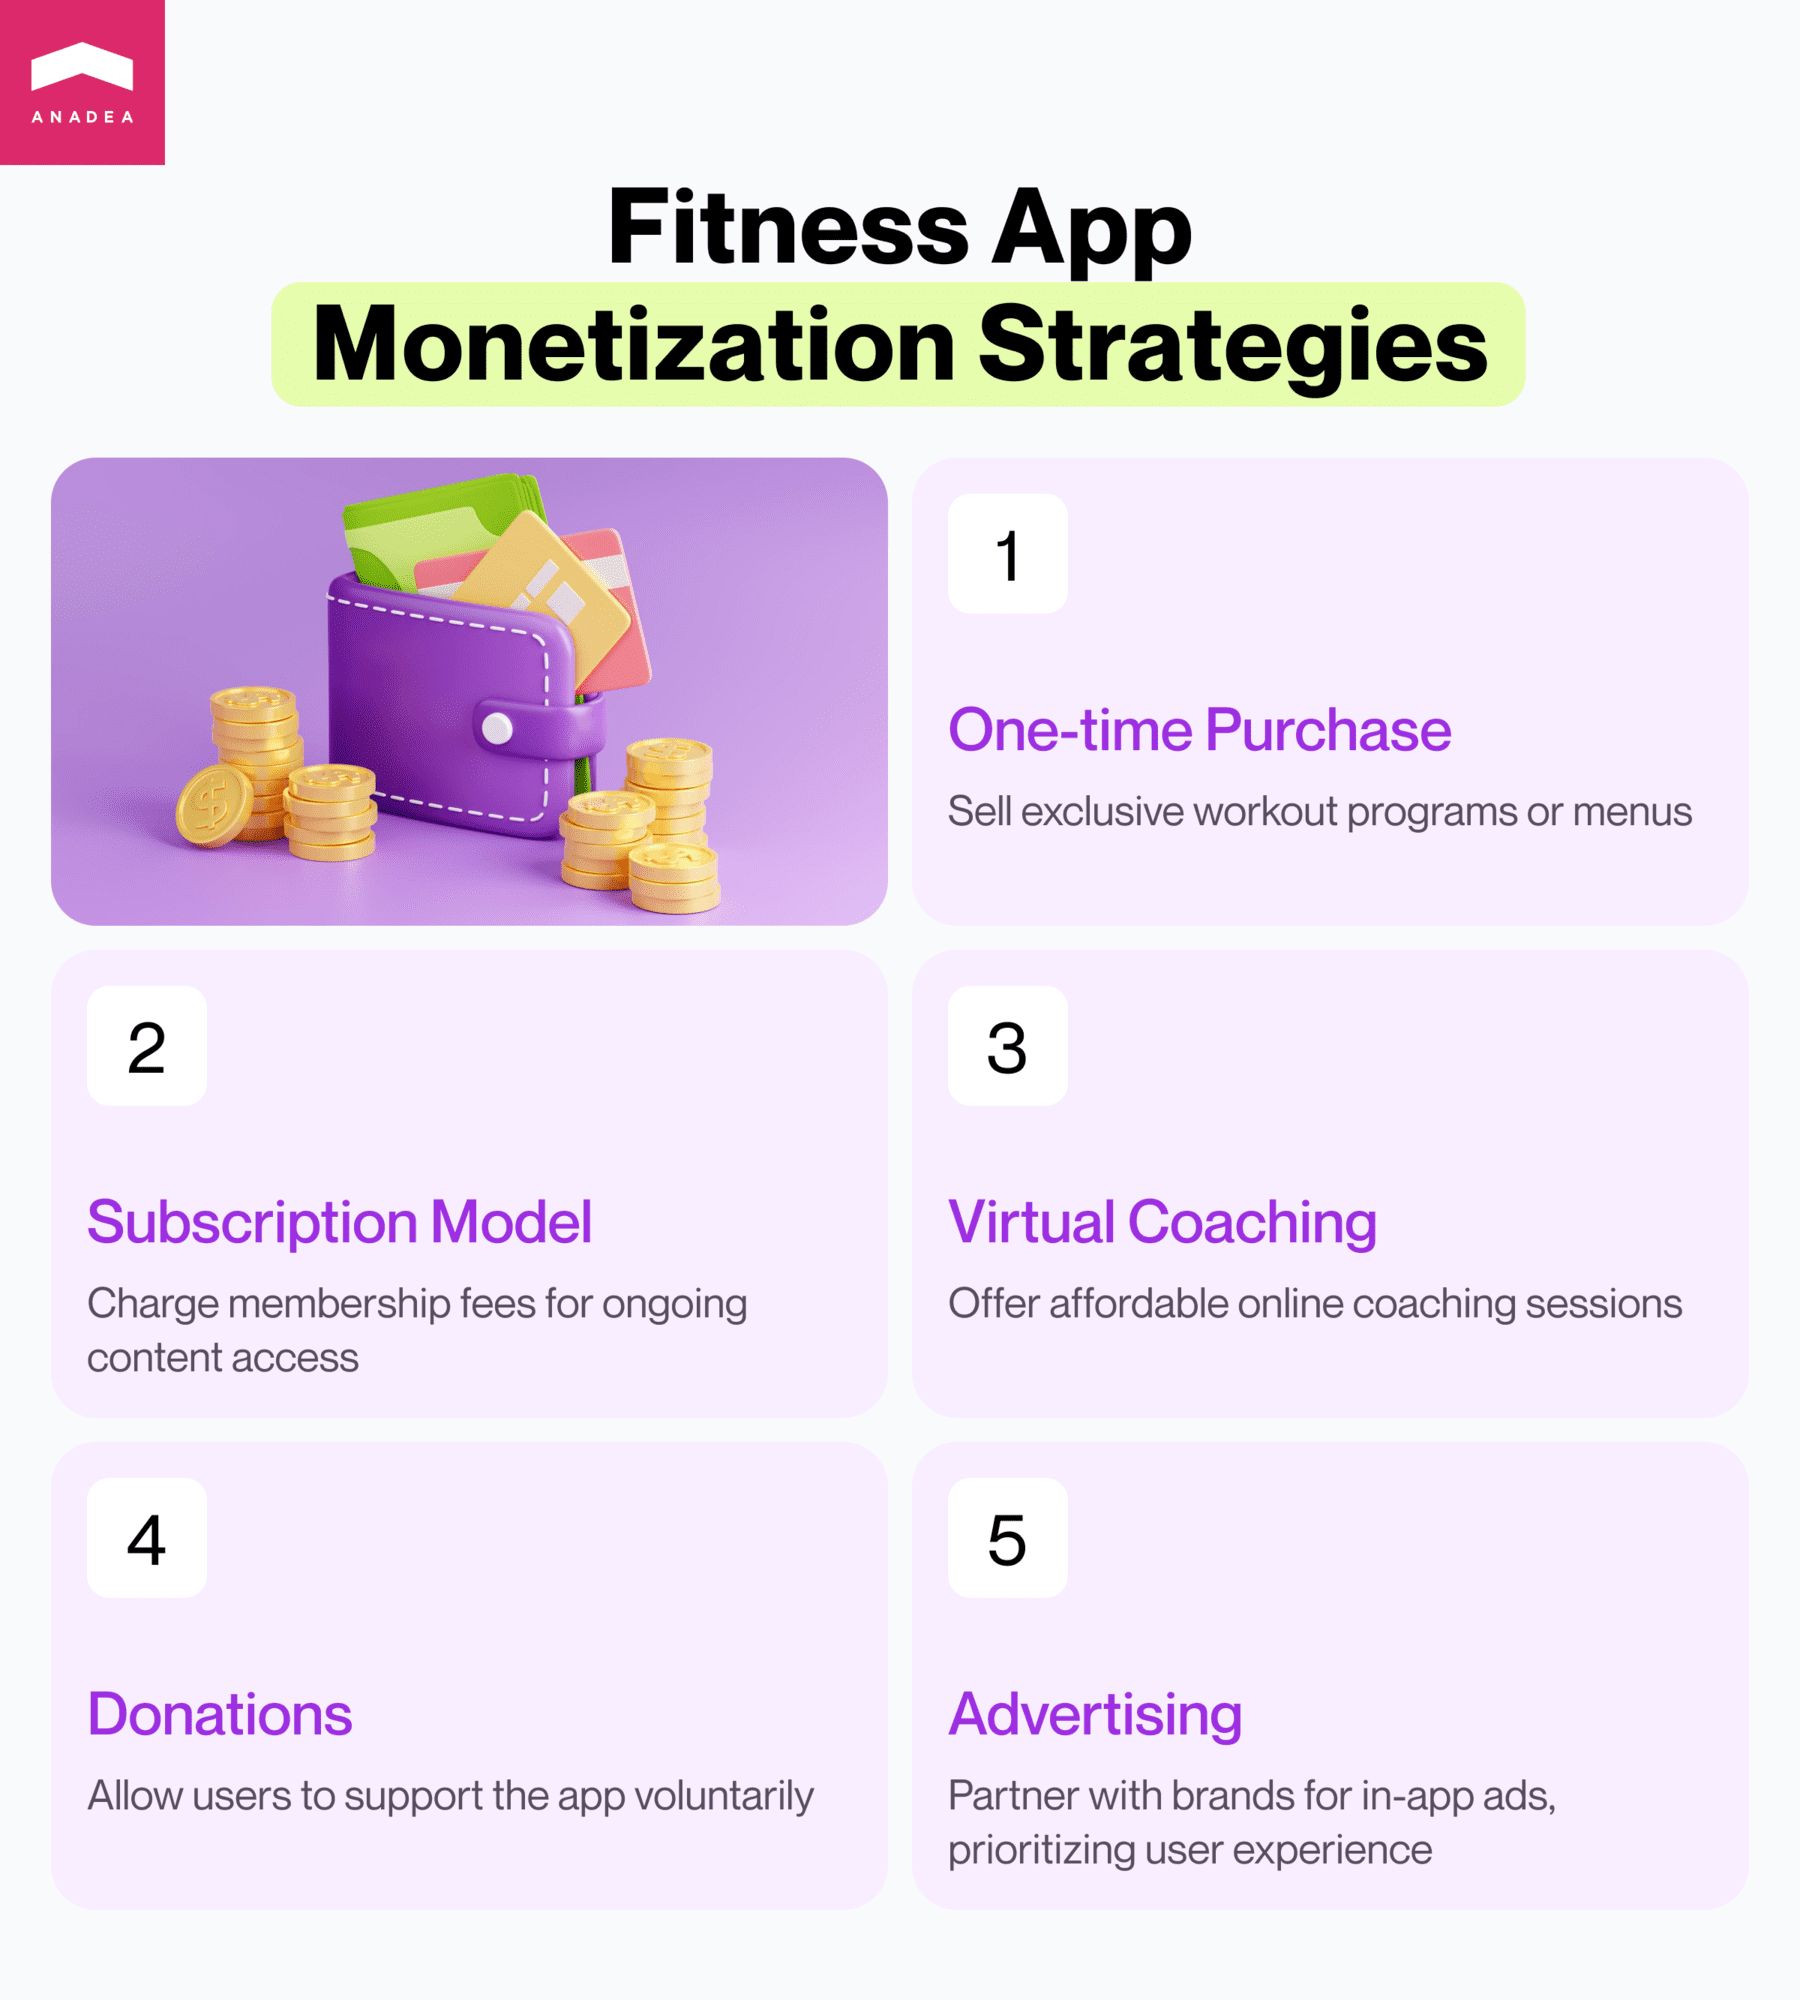 How to monetize fintess apps